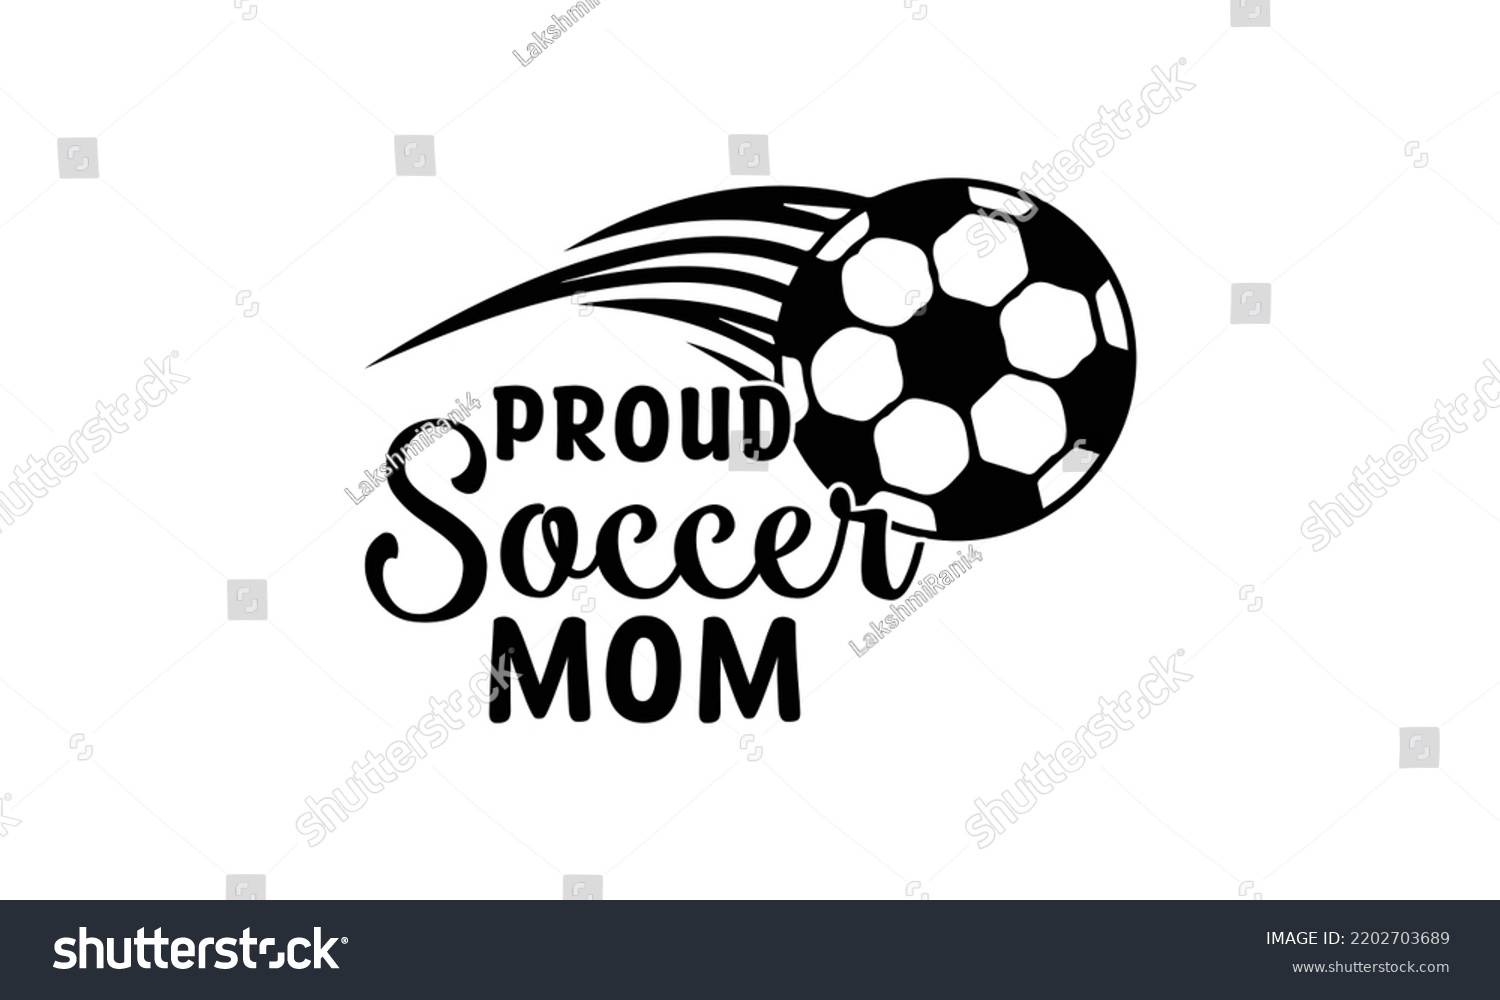 SVG of   Proud Soccer Mom -   Lettering design for greeting banners, Mouse Pads, Prints, Cards and Posters, Mugs, Notebooks, Floor Pillows and T-shirt prints design.
 svg